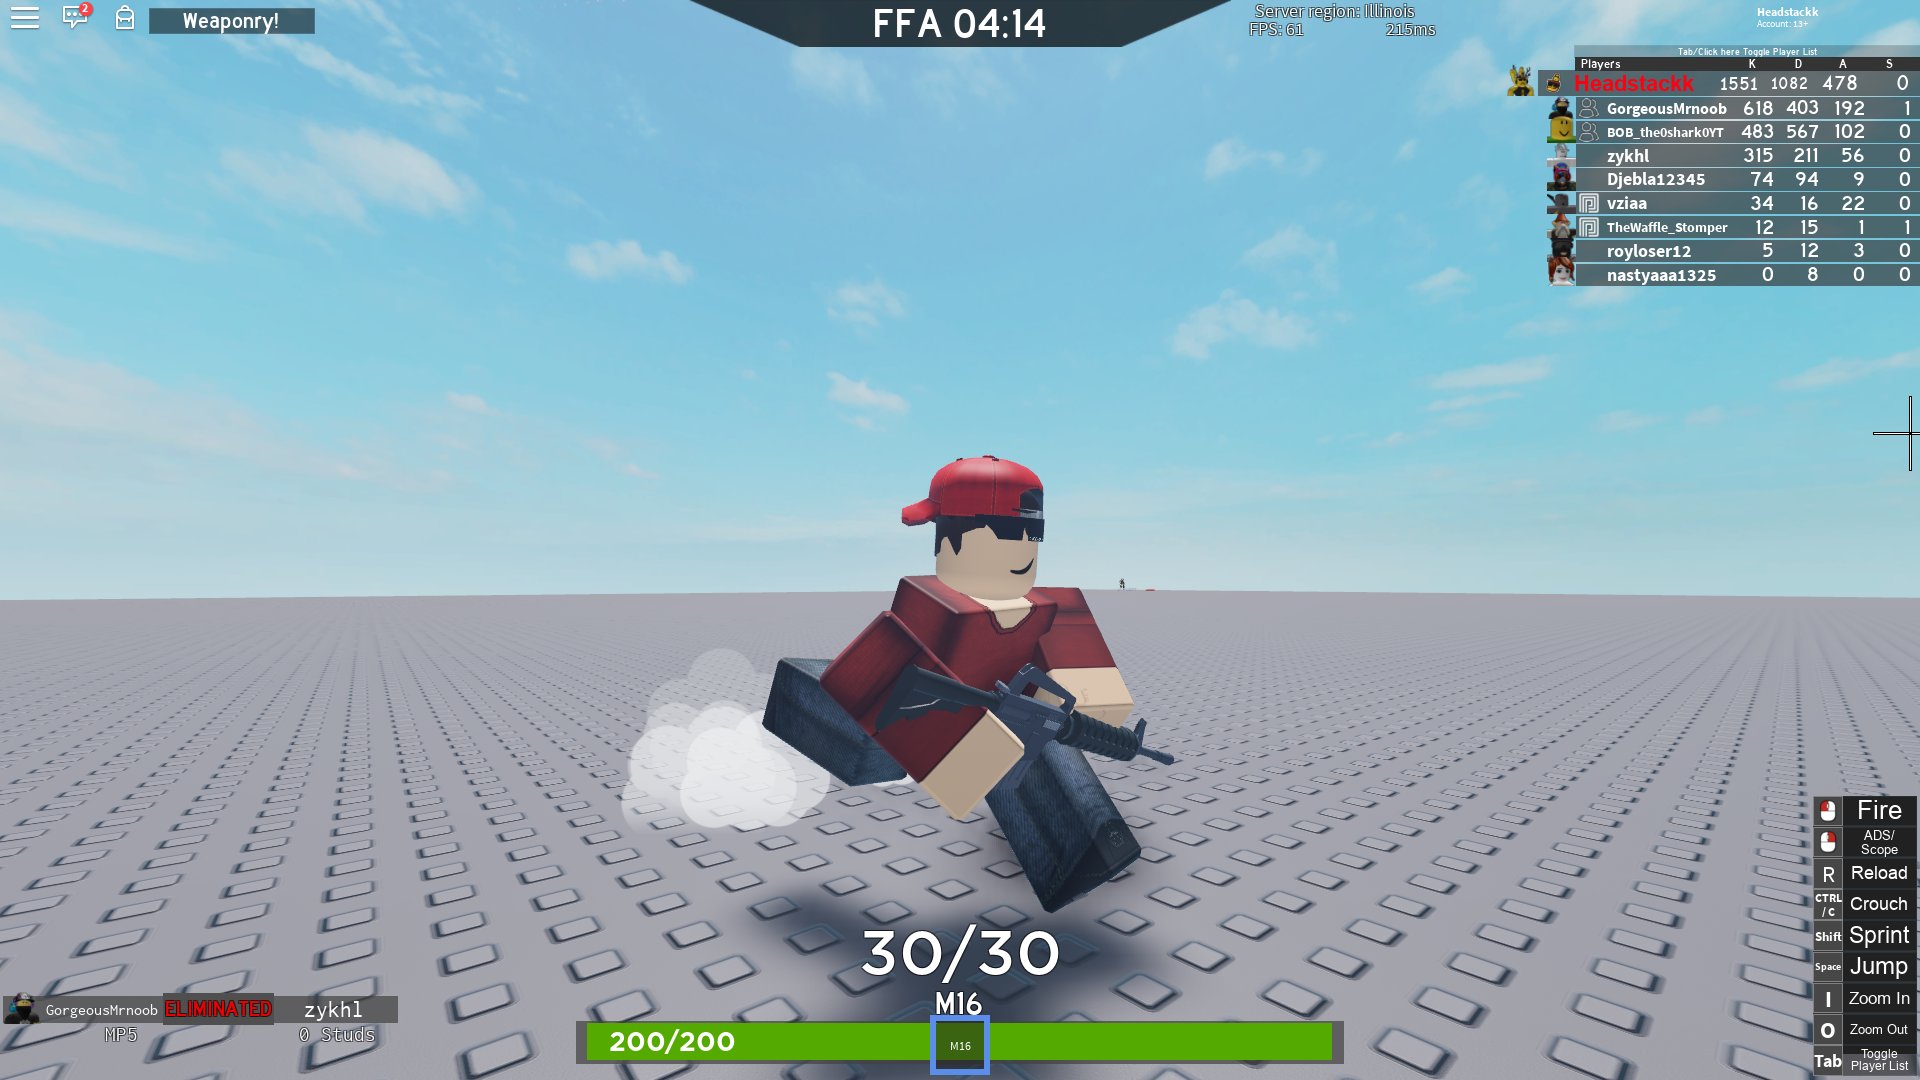 Headstackk On Twitter Arsenal In Third Person Damn Lookin Fresh Doe Ngl - how do you crouch in arsenal roblox pc